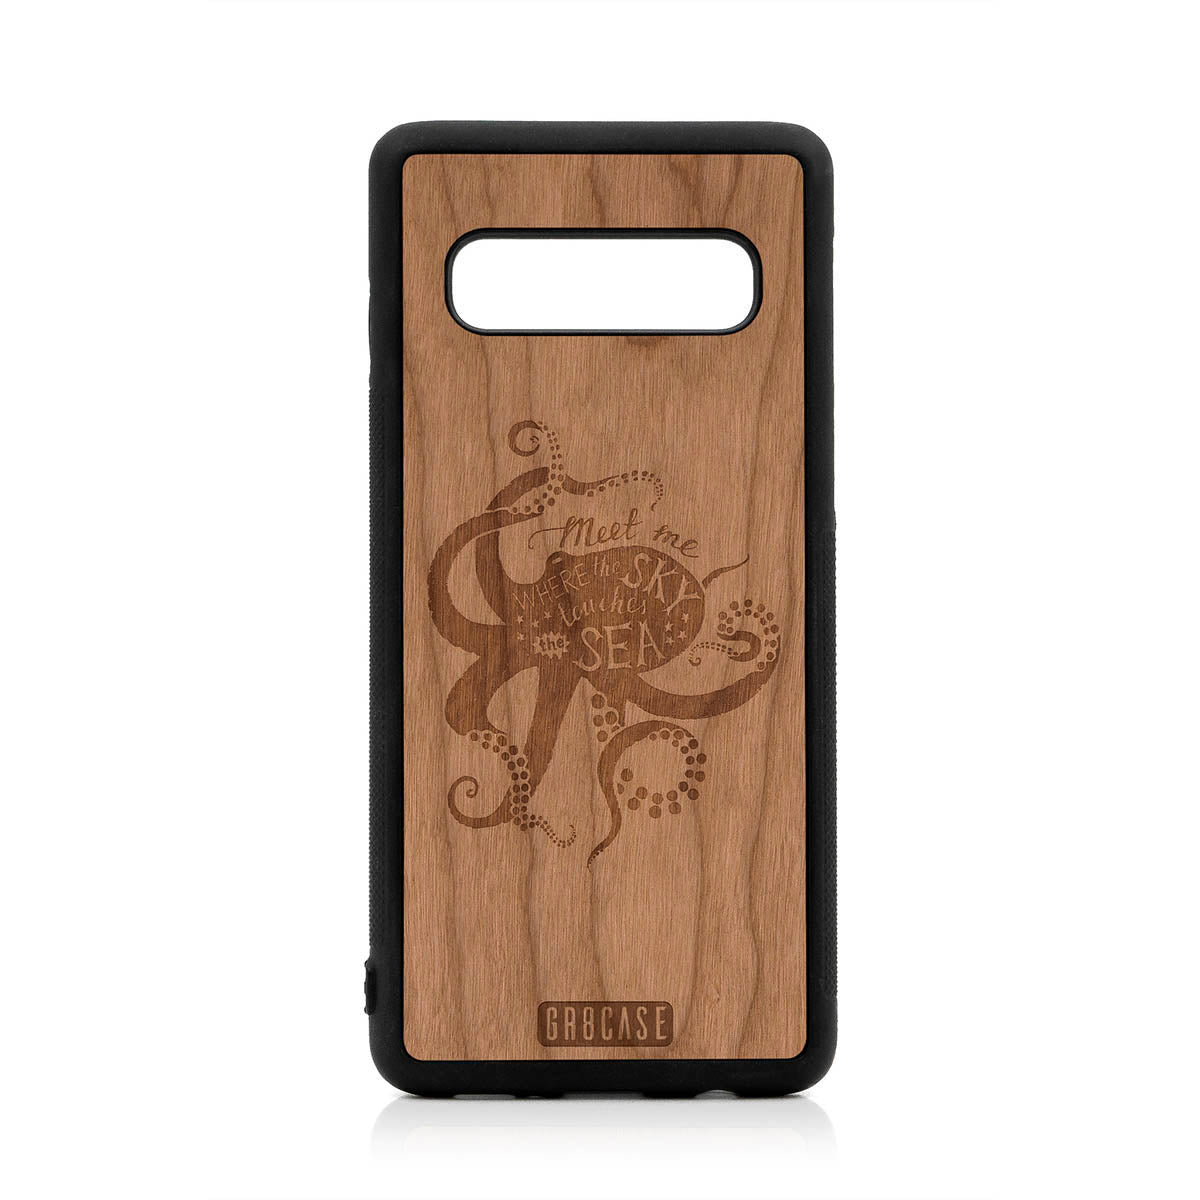 Meet Me Where The Sky Touches The Sea (Octopus) Design Wood Case For Samsung Galaxy S10